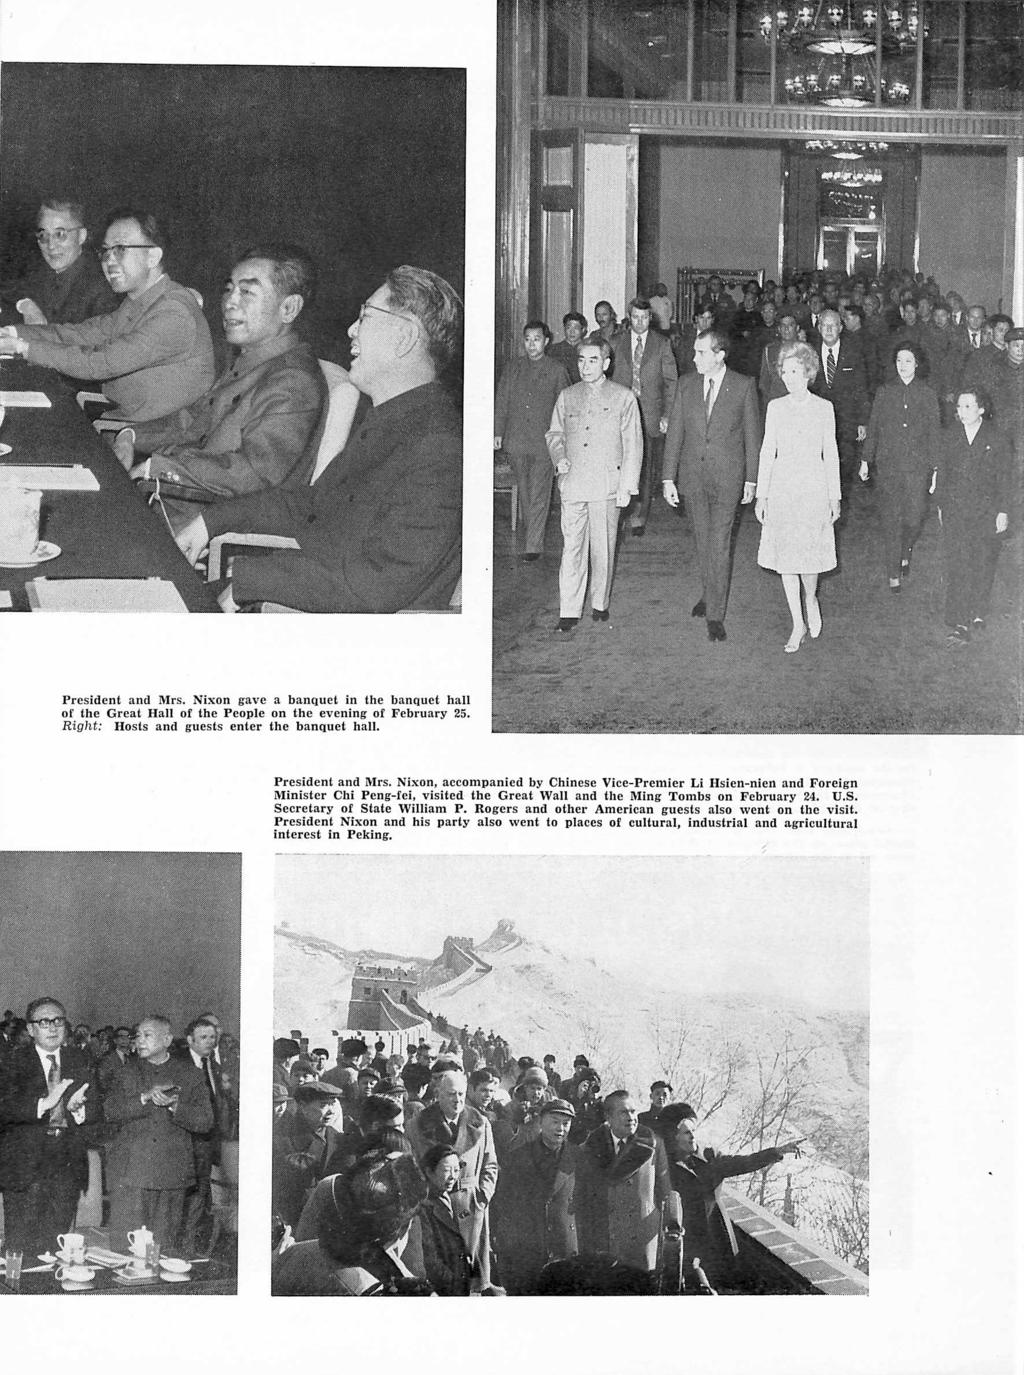 , 7 < President and Mrs. Nixon gave a banquet m the banquet hall of the Great Hall of the People on the evening of February 25. Right: Hosts and guests enter the banquet hall. President and Mrs. Nixon, accompanied by Chinese Vice-Premier Li Hsien-nien and Foreign Minister Chi Peng-fei, visited the Great Wall and the Ming Tombs on February 24.